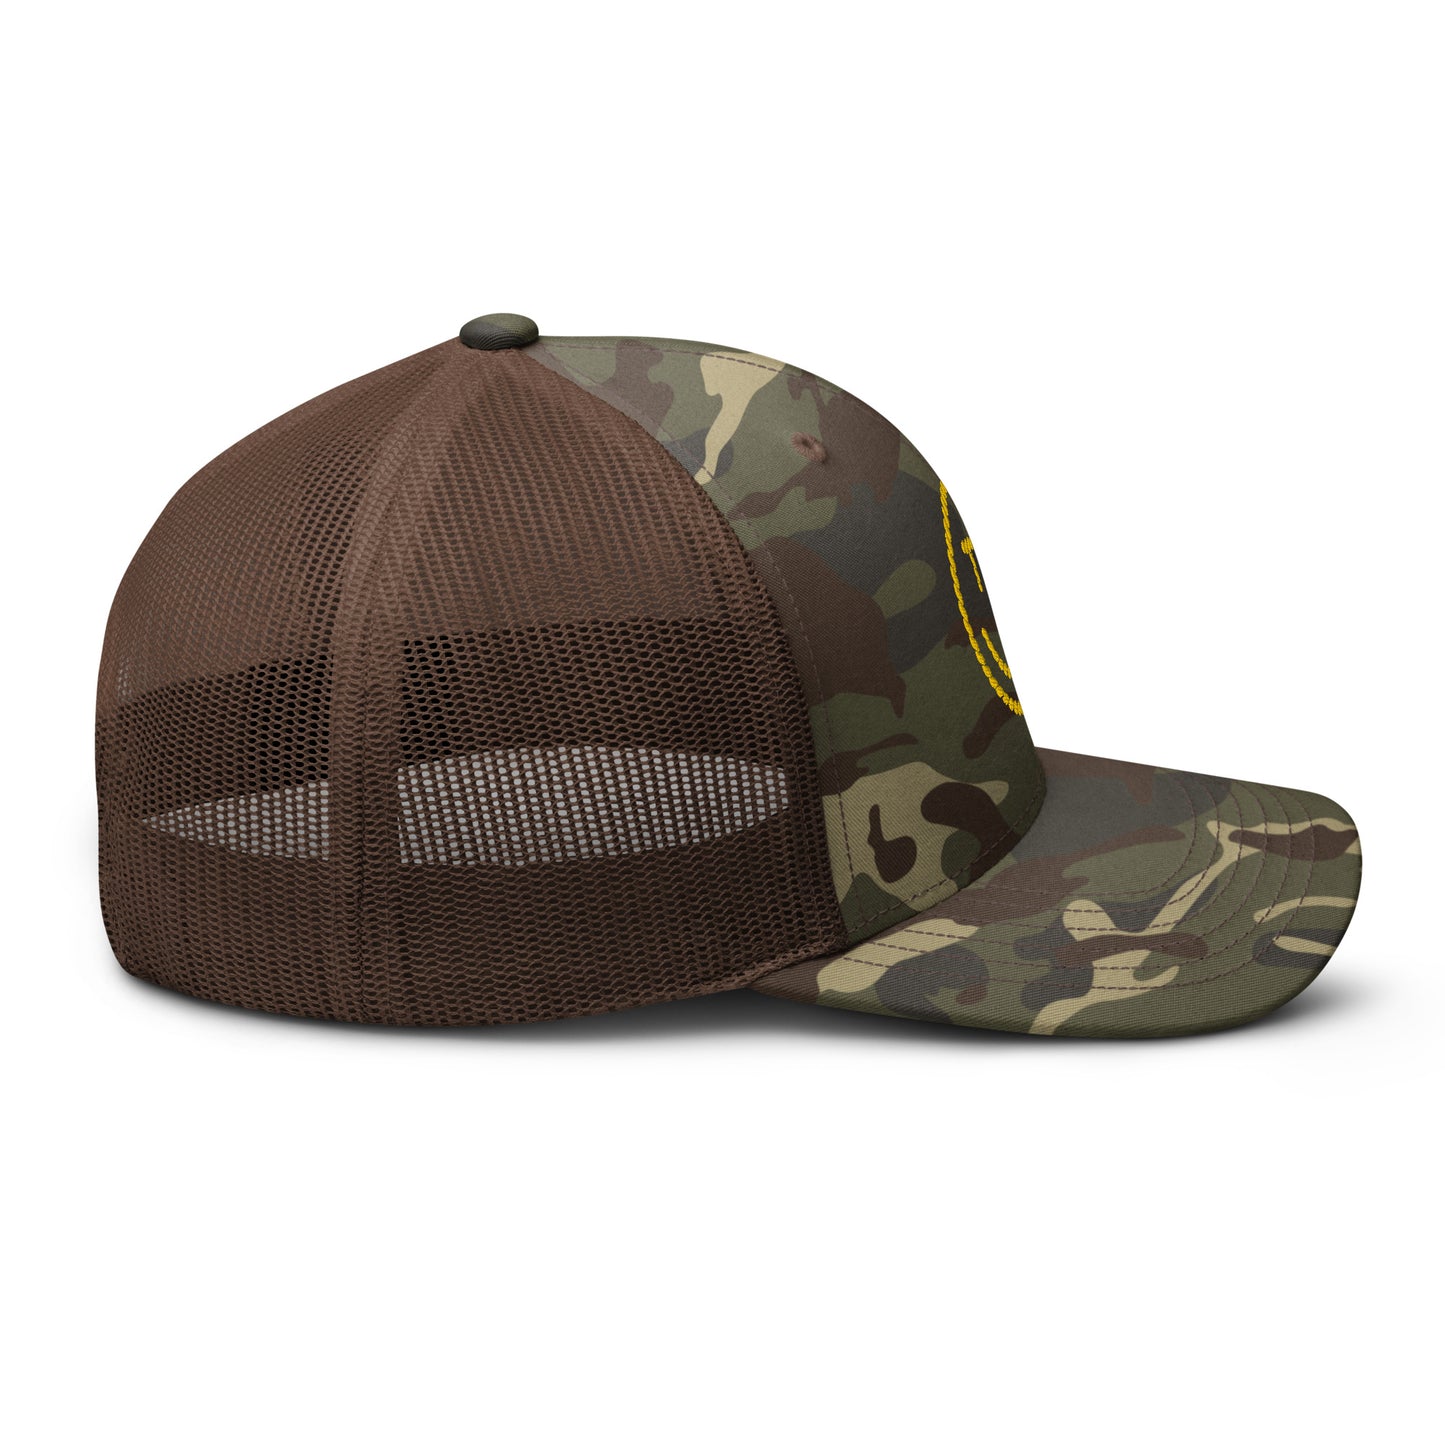 TX Smile Rope - Camouflage trucker hat